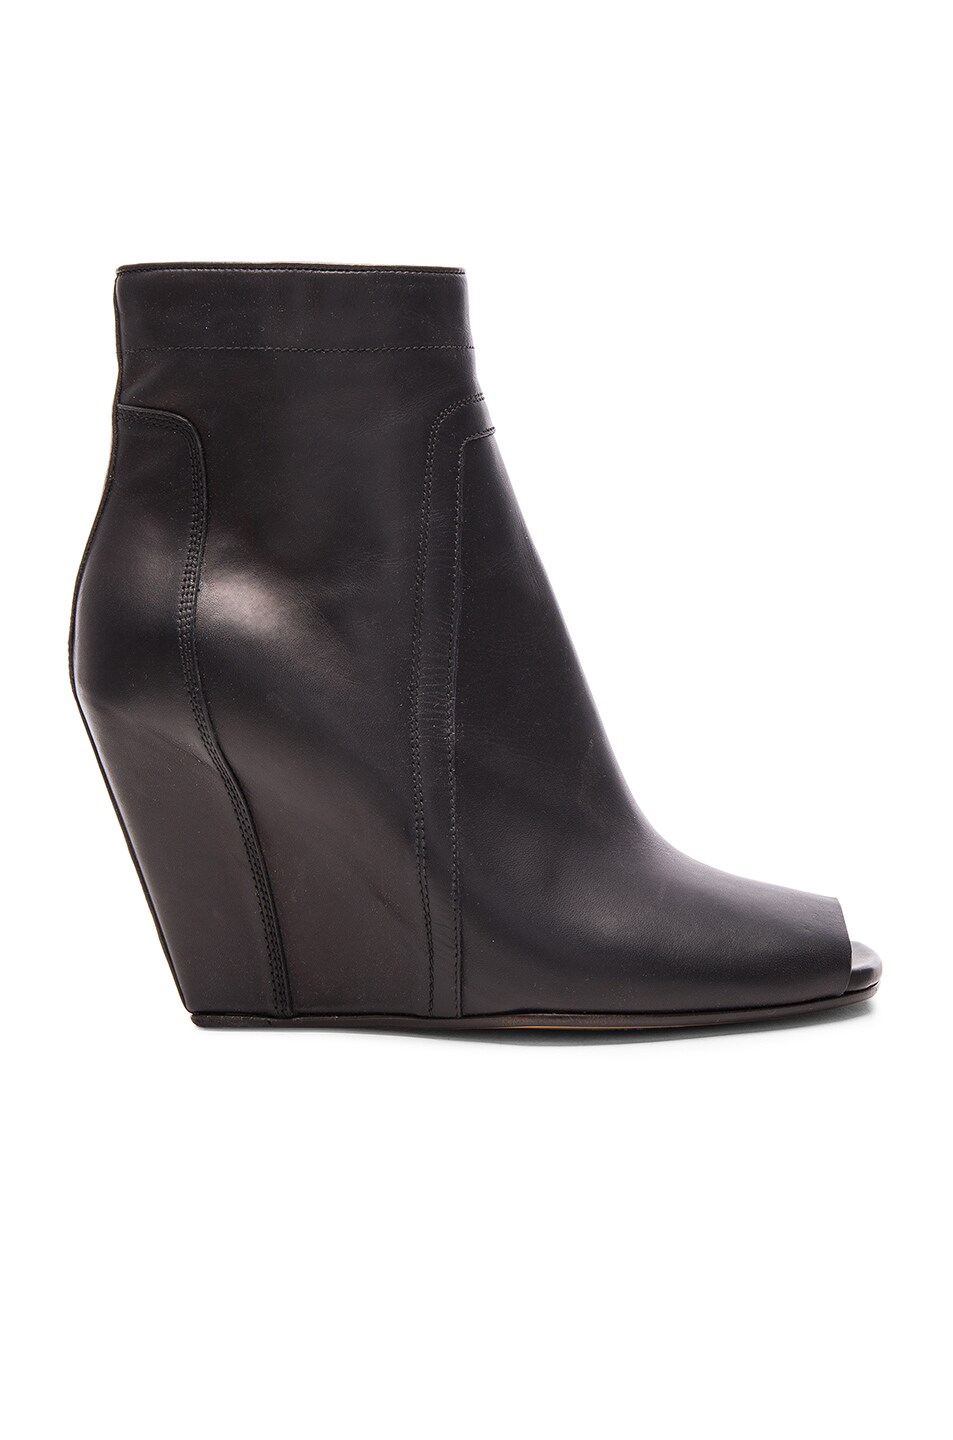 Image 1 of Rick Owens Open Toe Leather Booties in Black